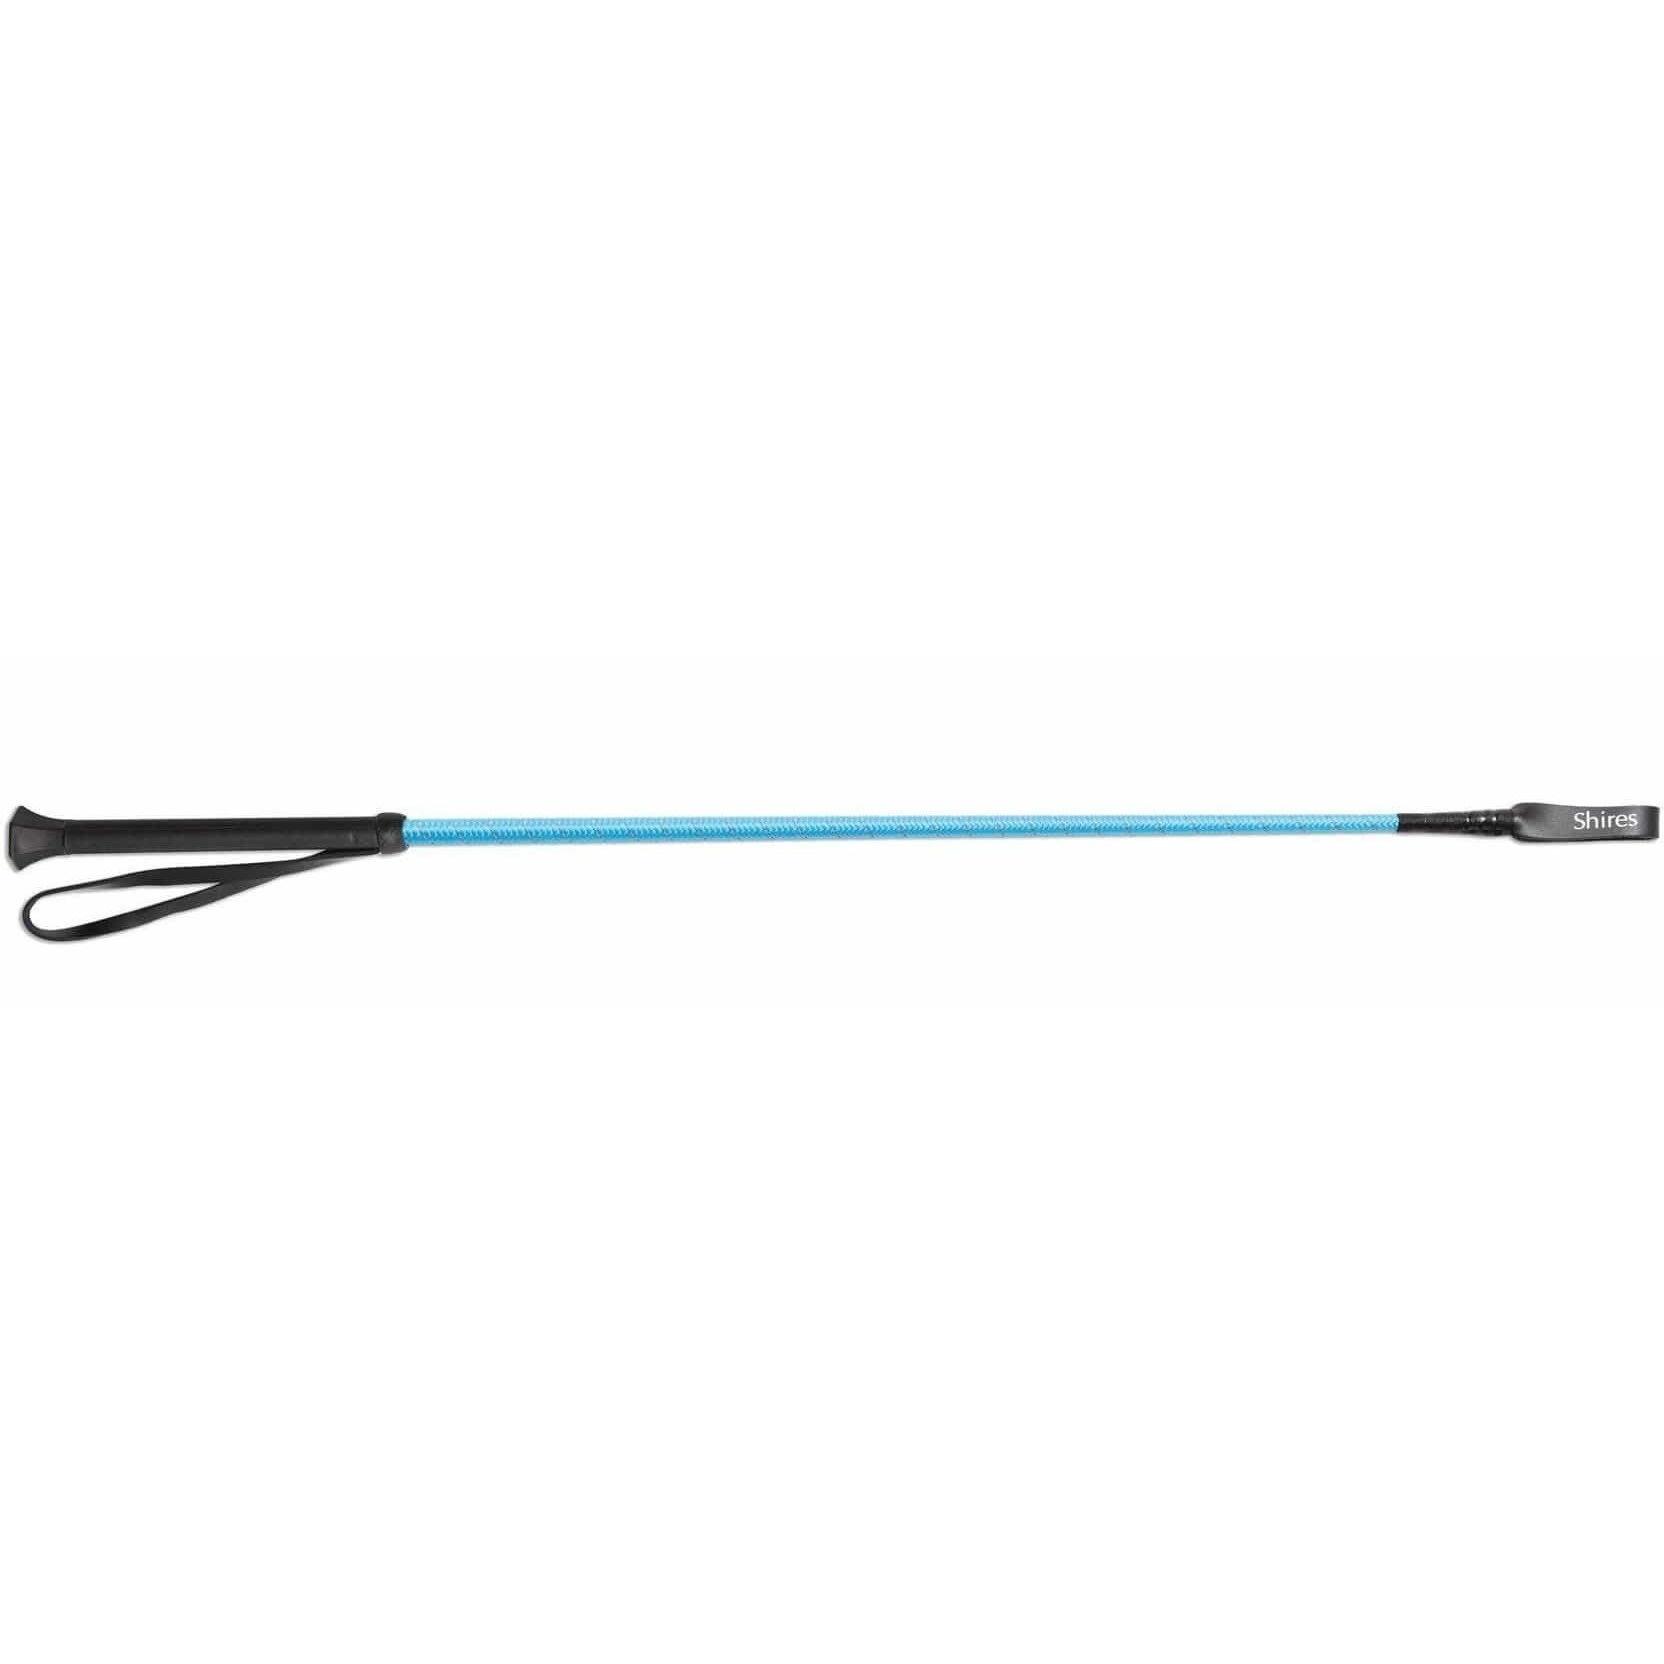 SHIRES Threaded Leather Horse Riding Whip (Bright Blue)